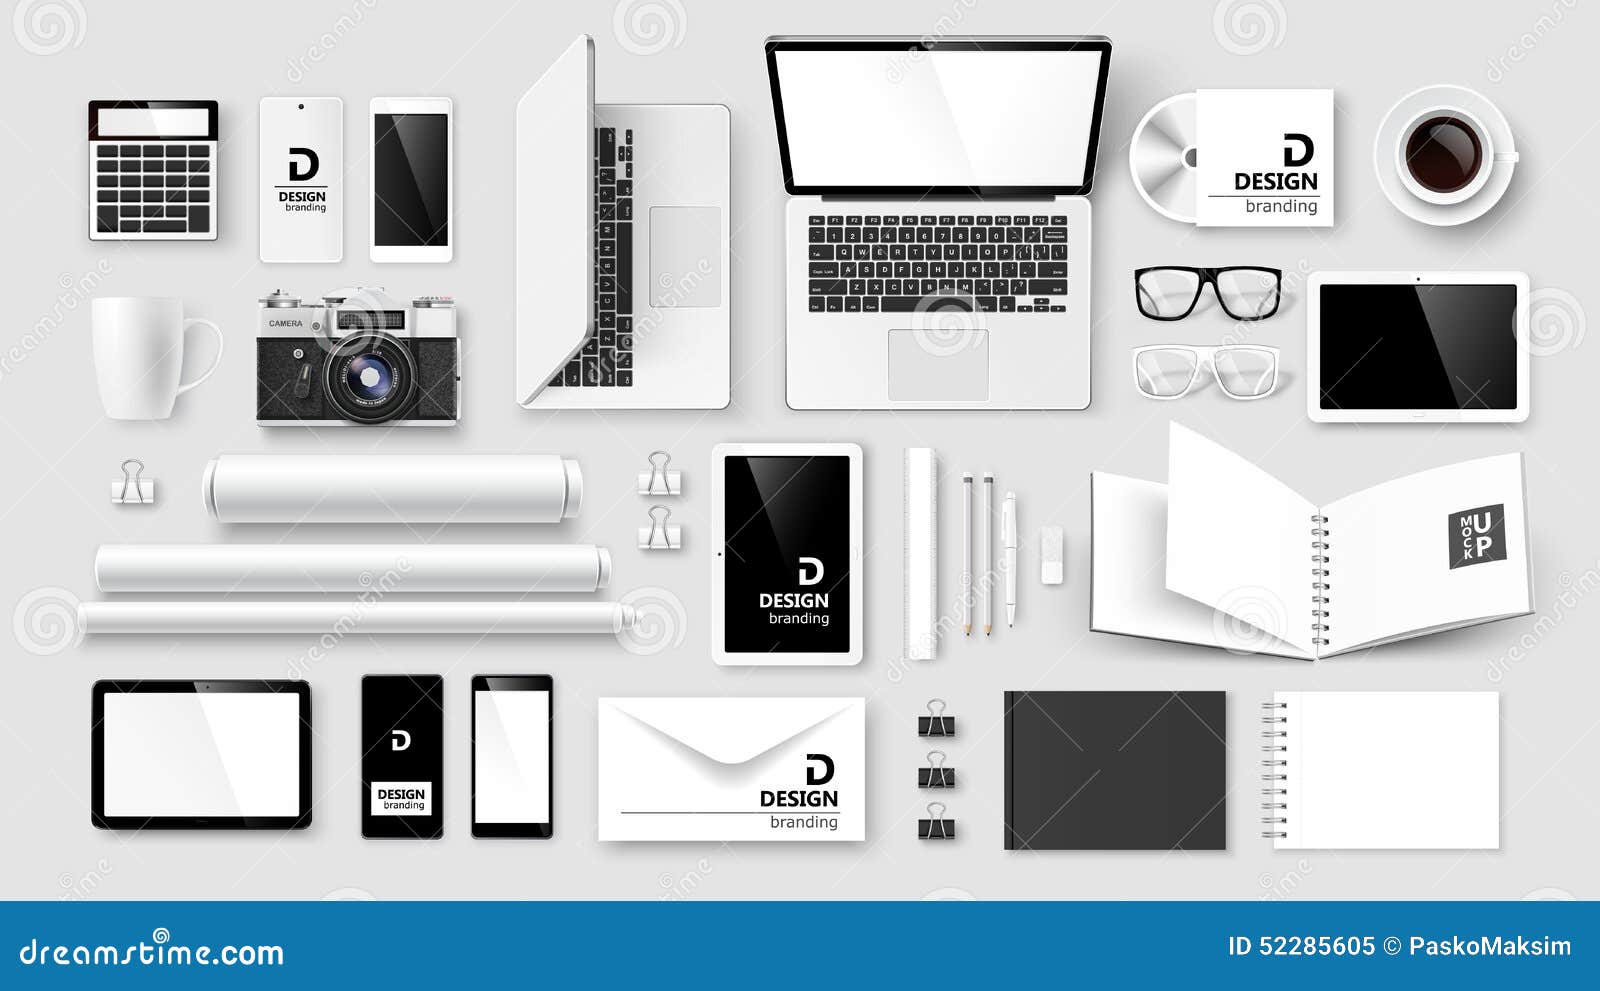 mock up set of corporate identity and branding